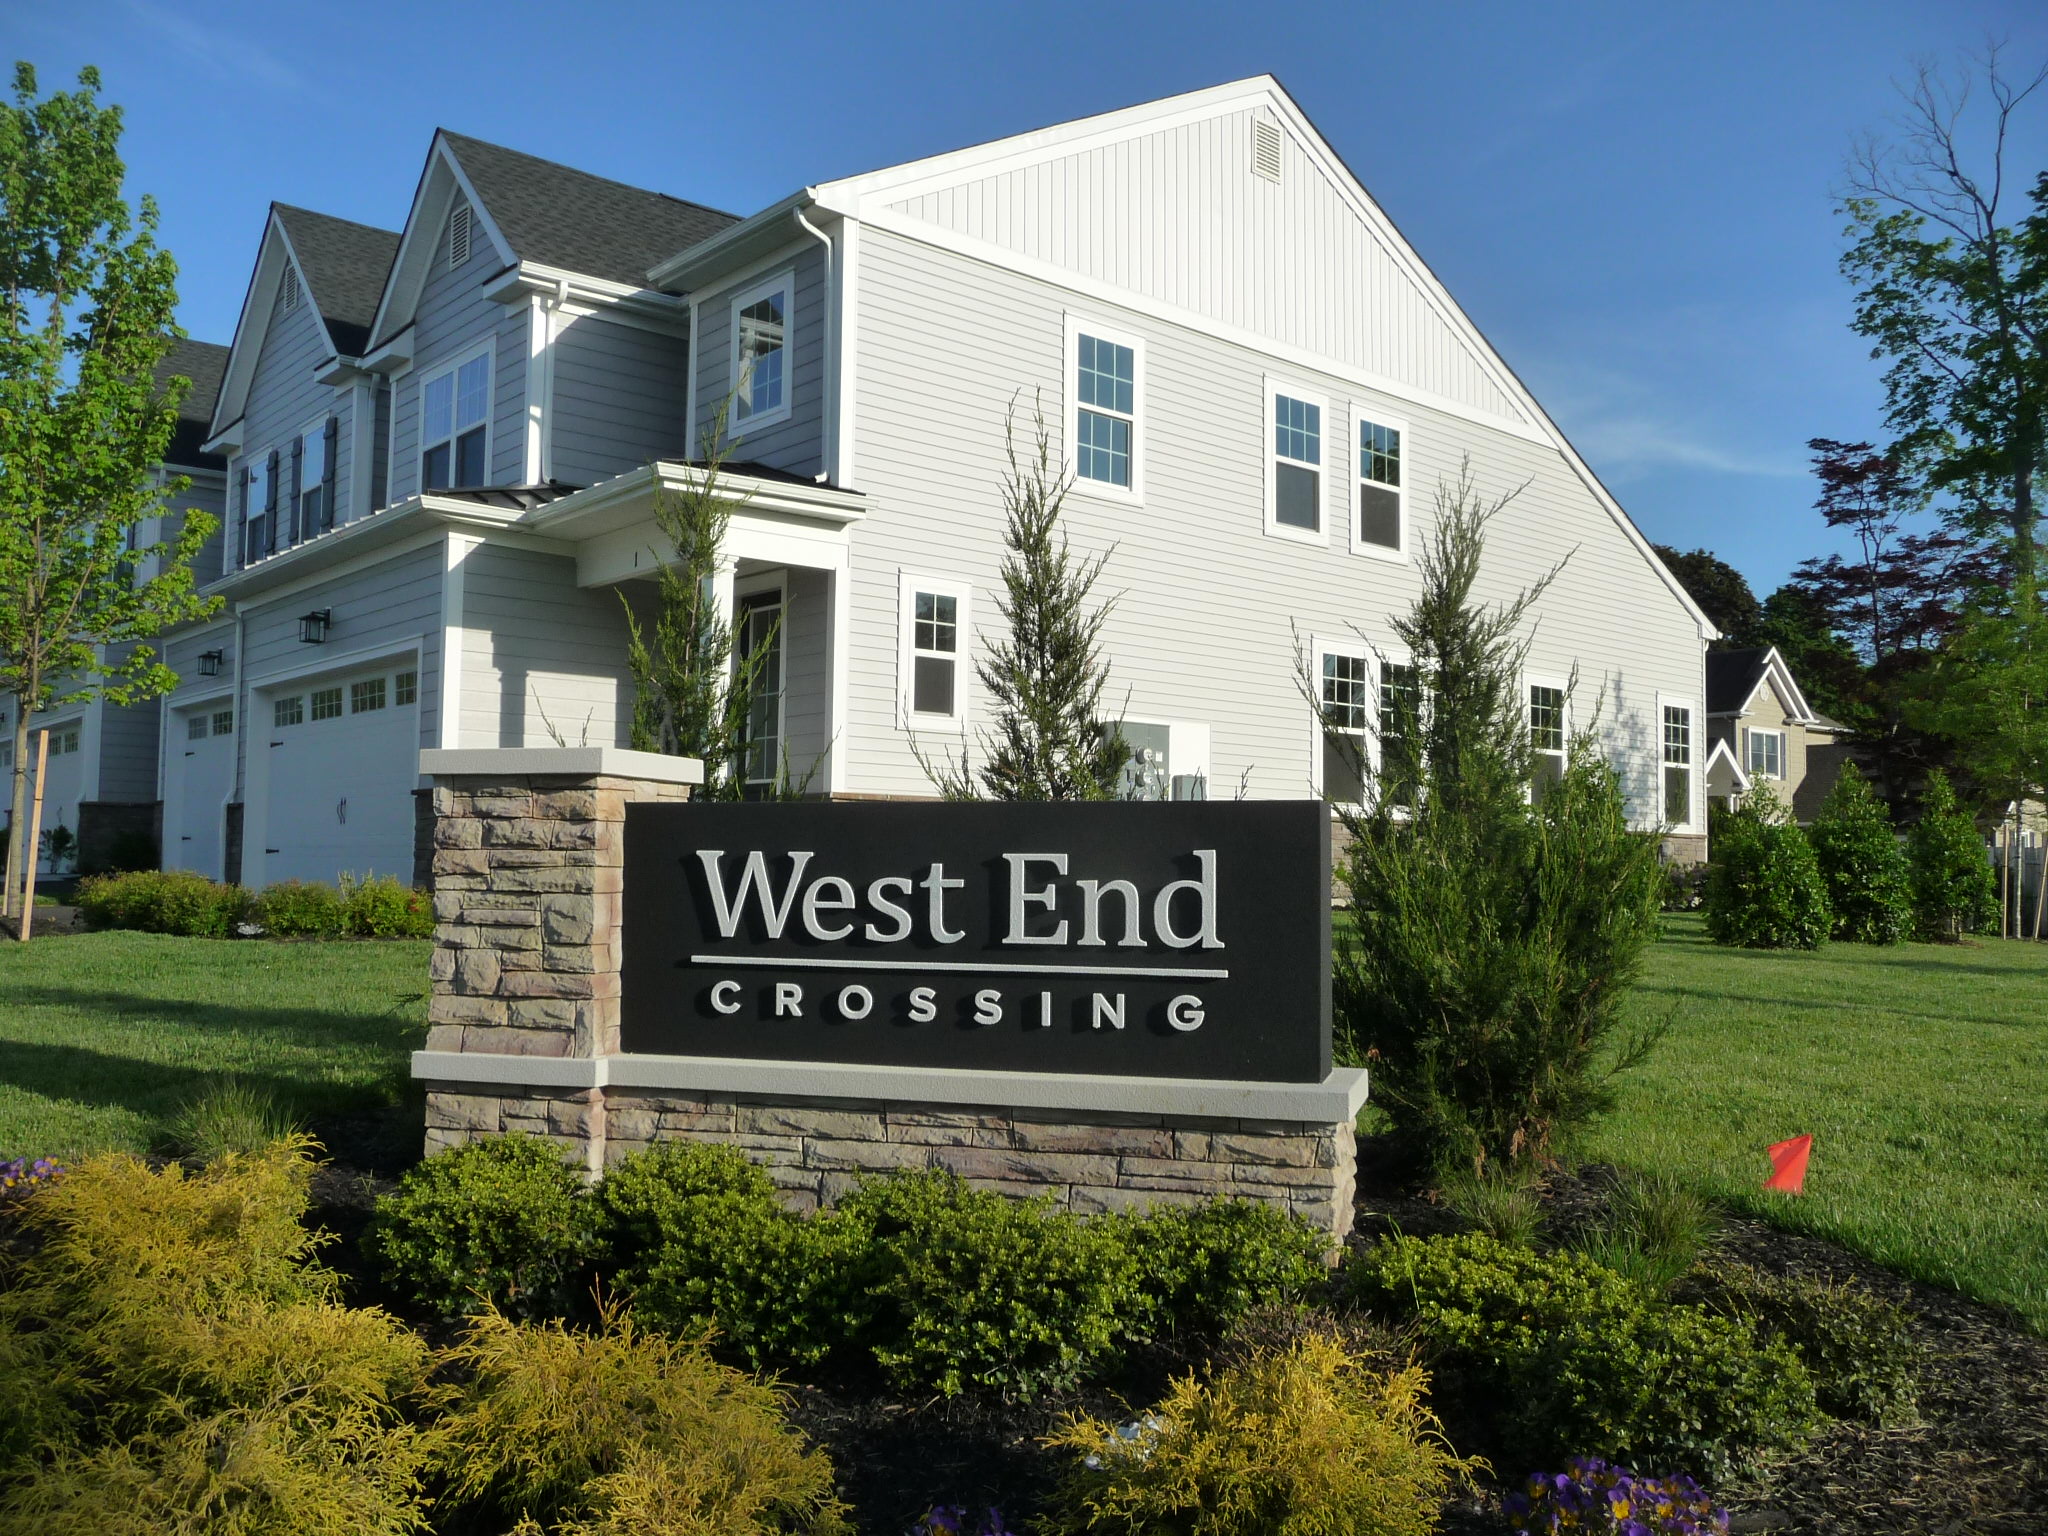 The model homes at West End Crossing in West Long Branch, NJ.